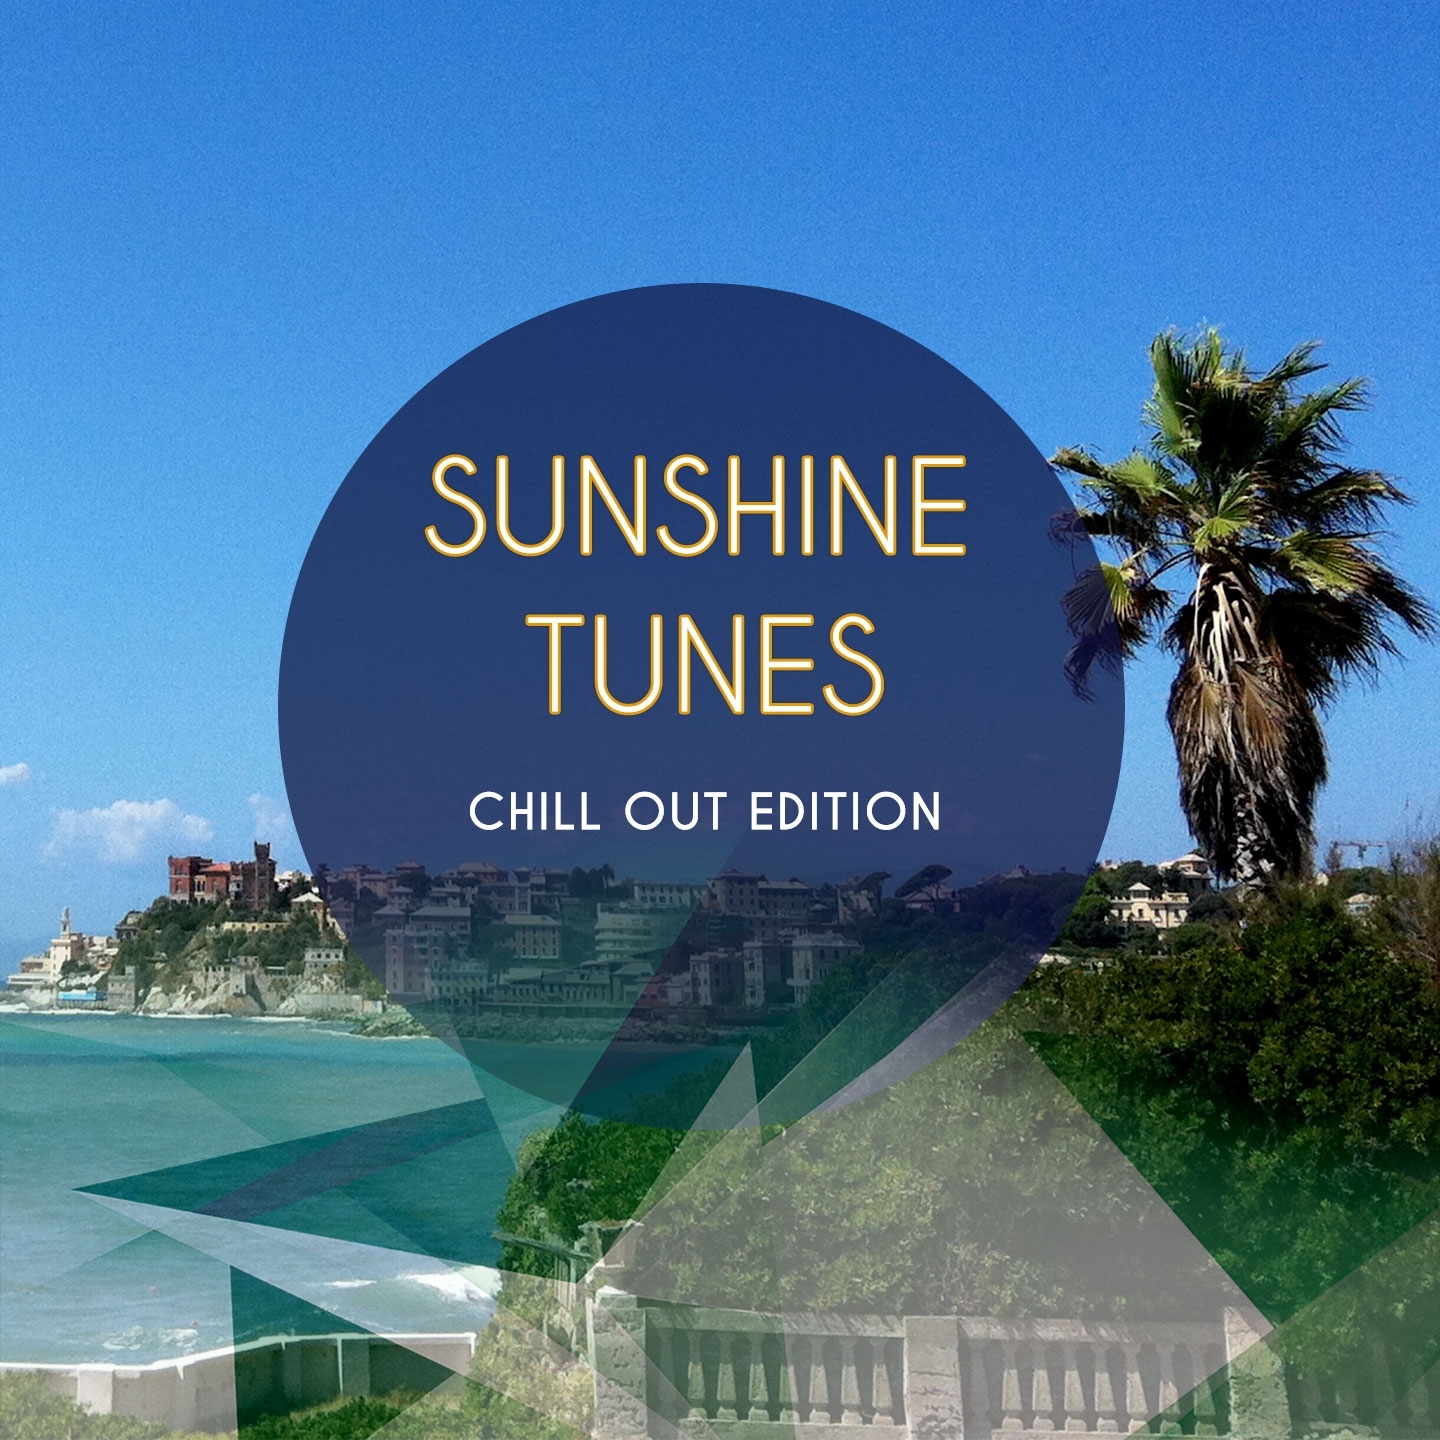 Sunshine Tunes - Chill out Edition, Vol. 1 (Finest Selection of Balearic White Isle Chill & Lounge Tunes)